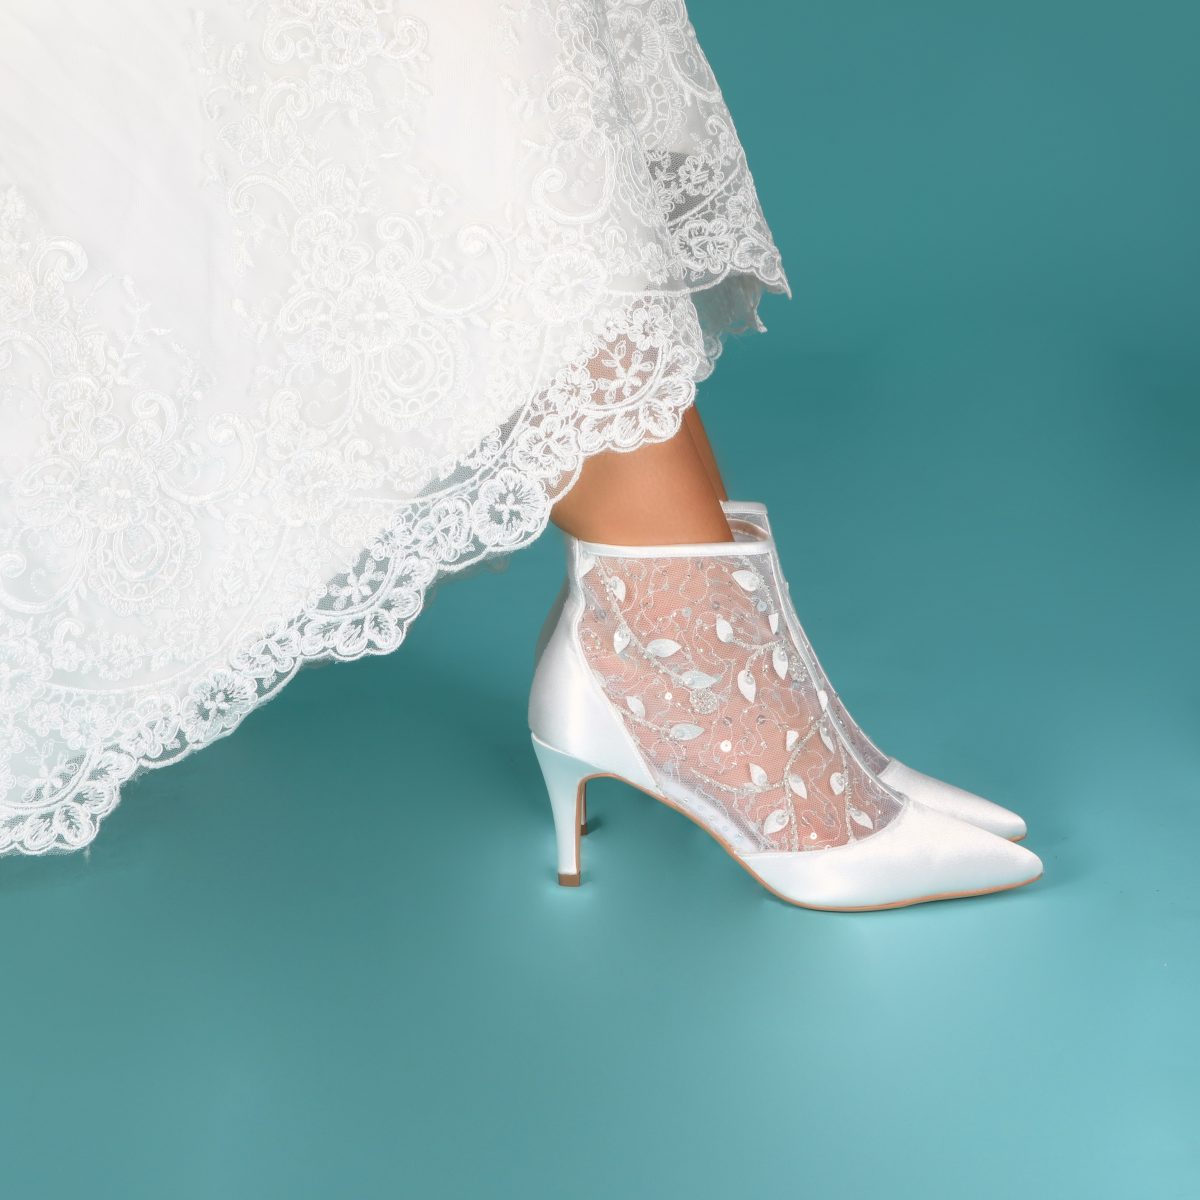 Perfect Bridal Imogen Boots - Ivory Satin /Sequin Mesh 2